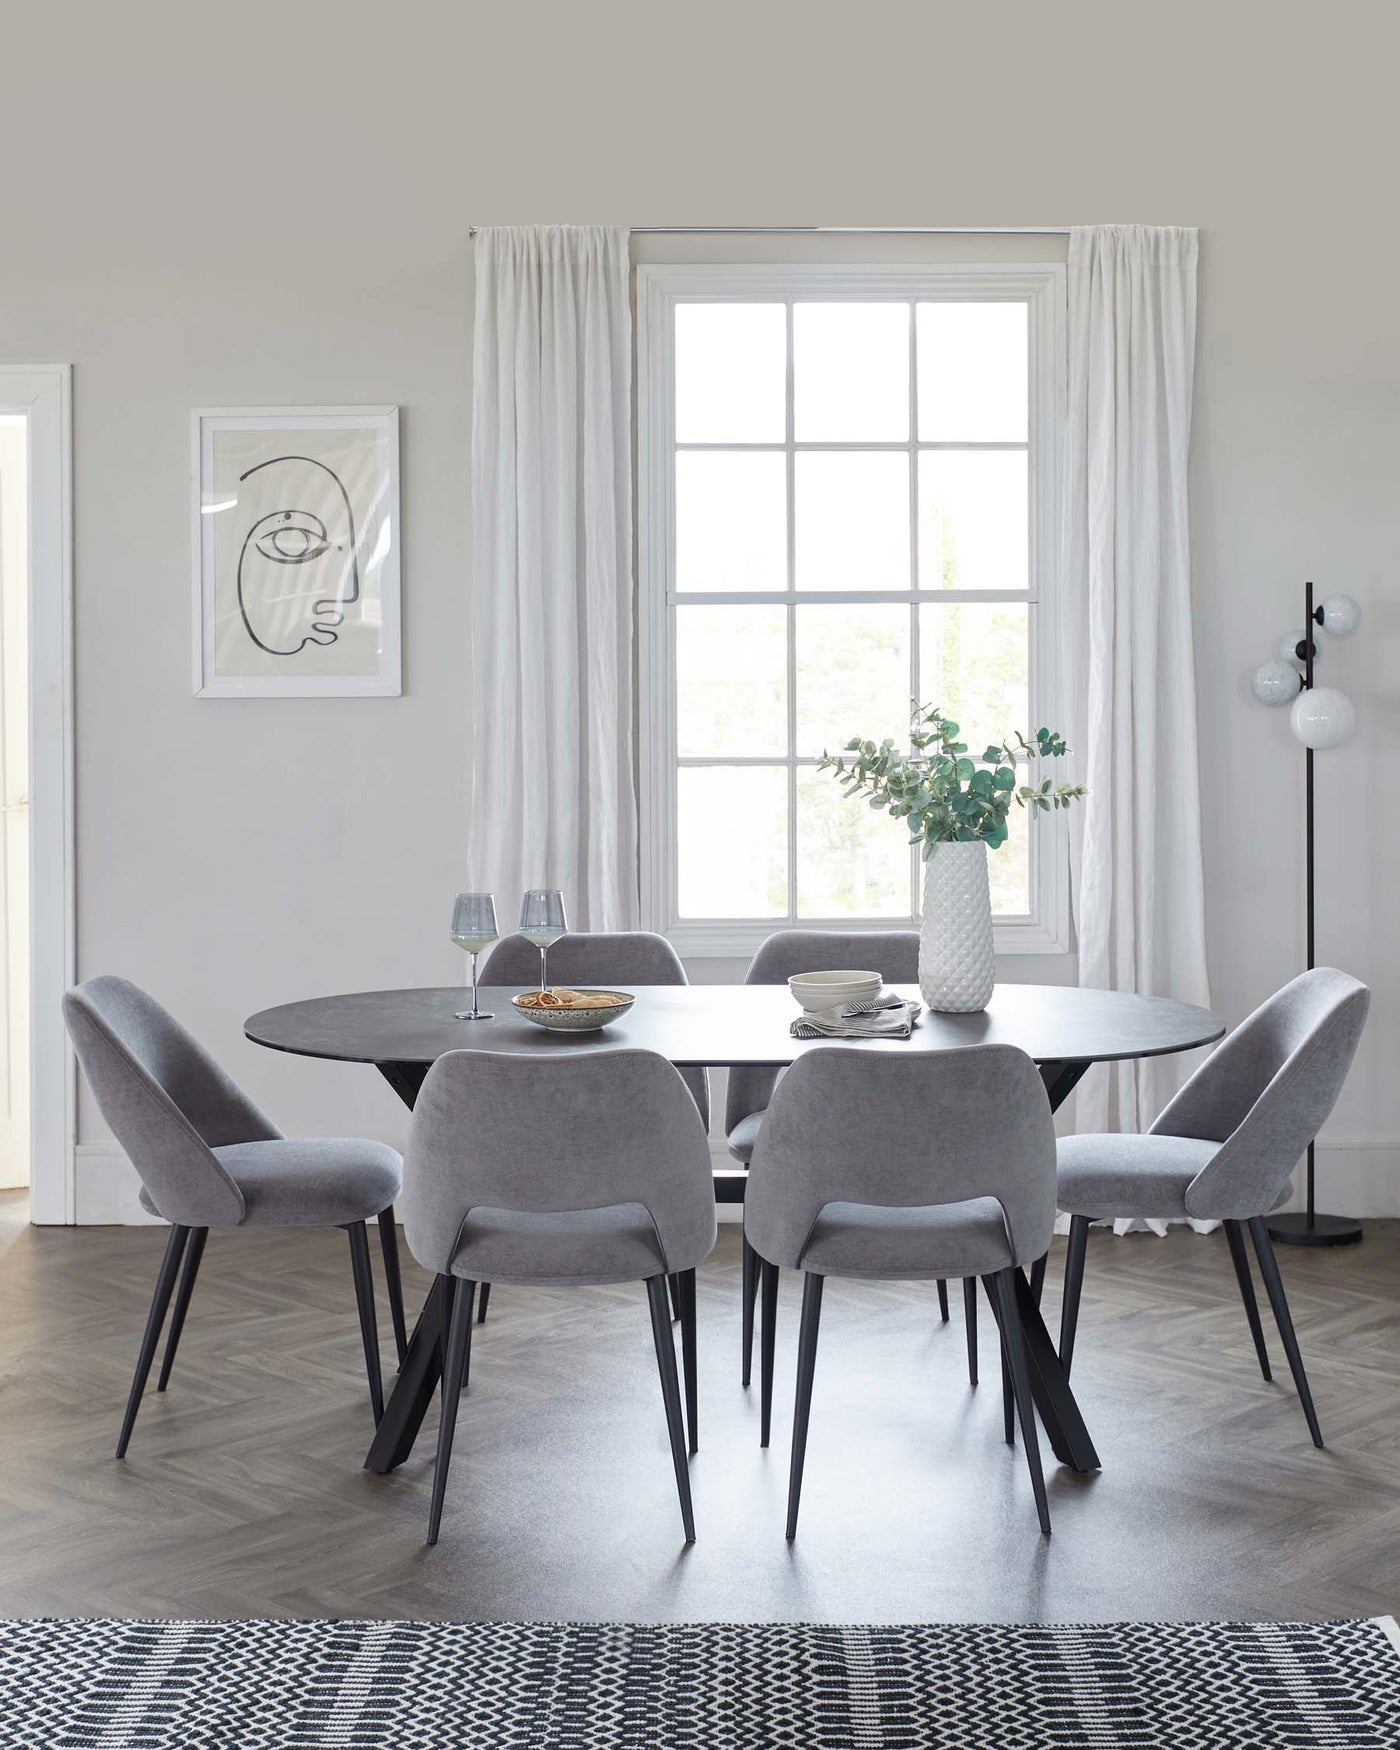 A modern dining room featuring a round, charcoal-grey table with a matte finish and sleek, black angular legs. Surrounding the table are six matching upholstered chairs in a light grey fabric with a soft silhouette and thin black metal legs. The setup is complemented by a geometric patterned grey and white area rug beneath.